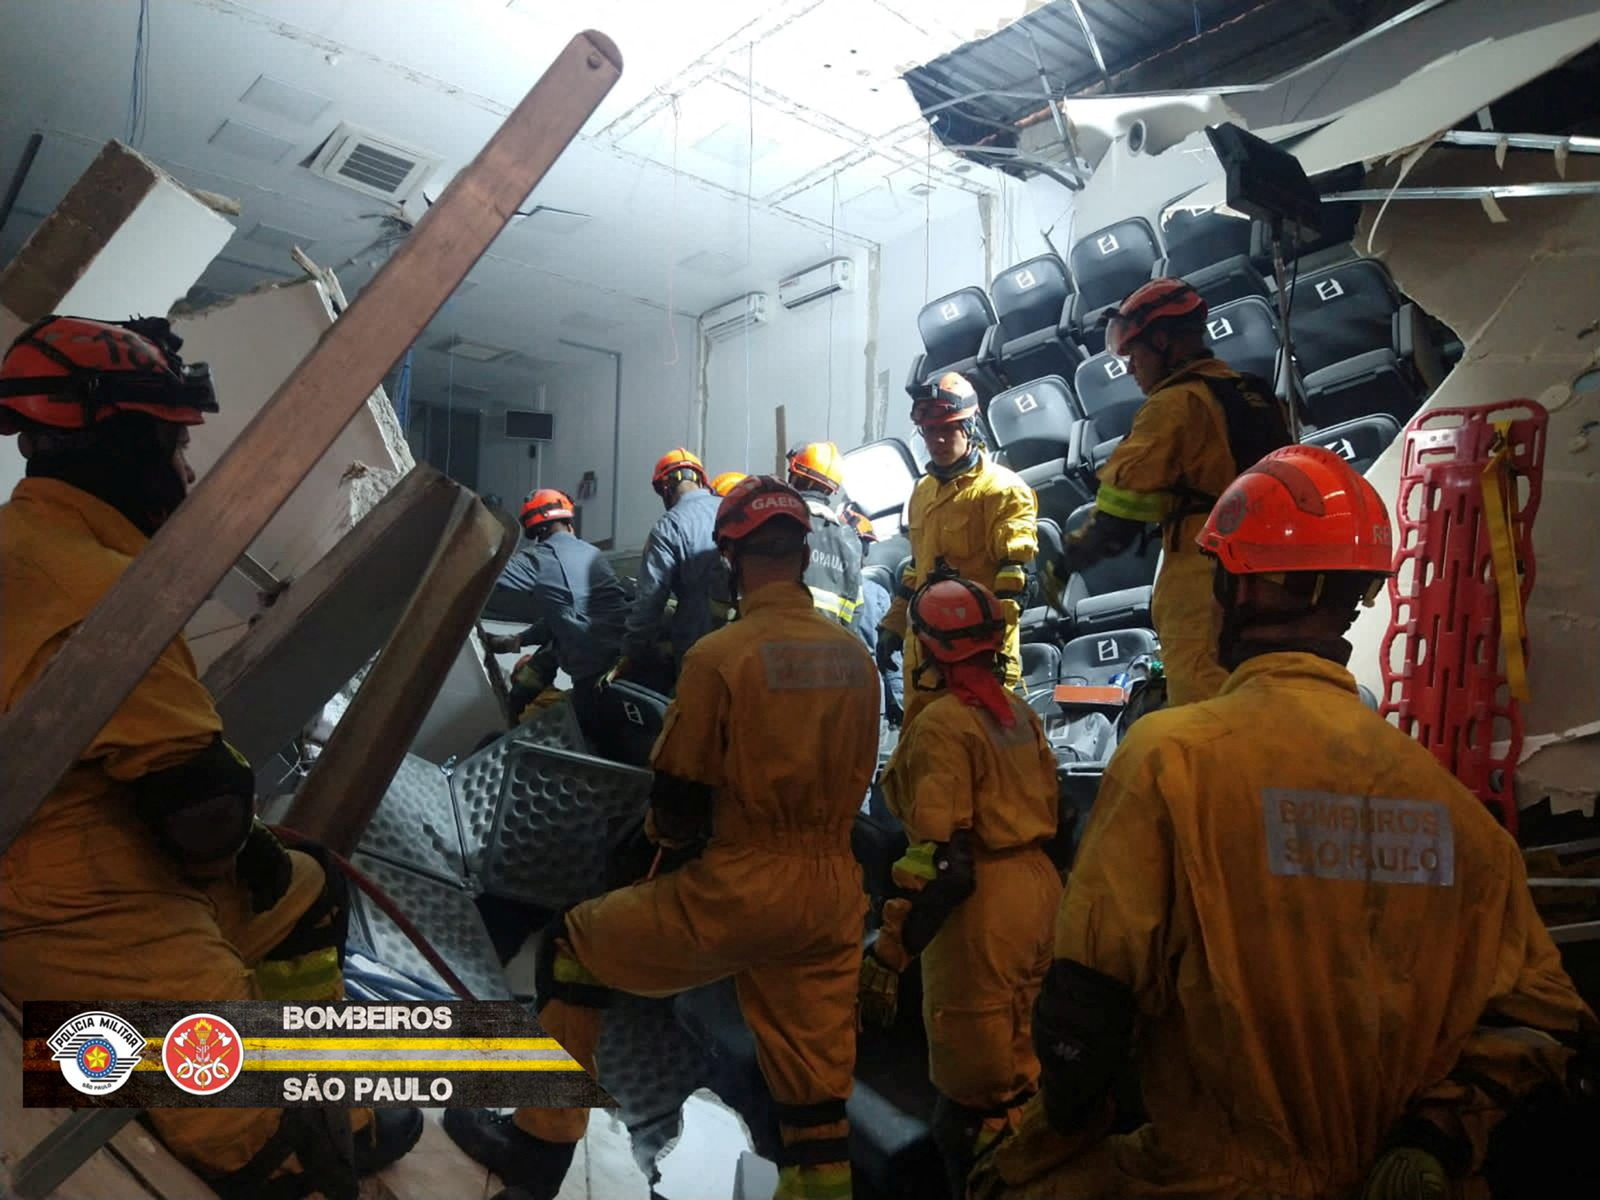 Members of the Fire Department of the State of Sao Paolo work after part of a warehouse collapsed in Itapecerica da Serra